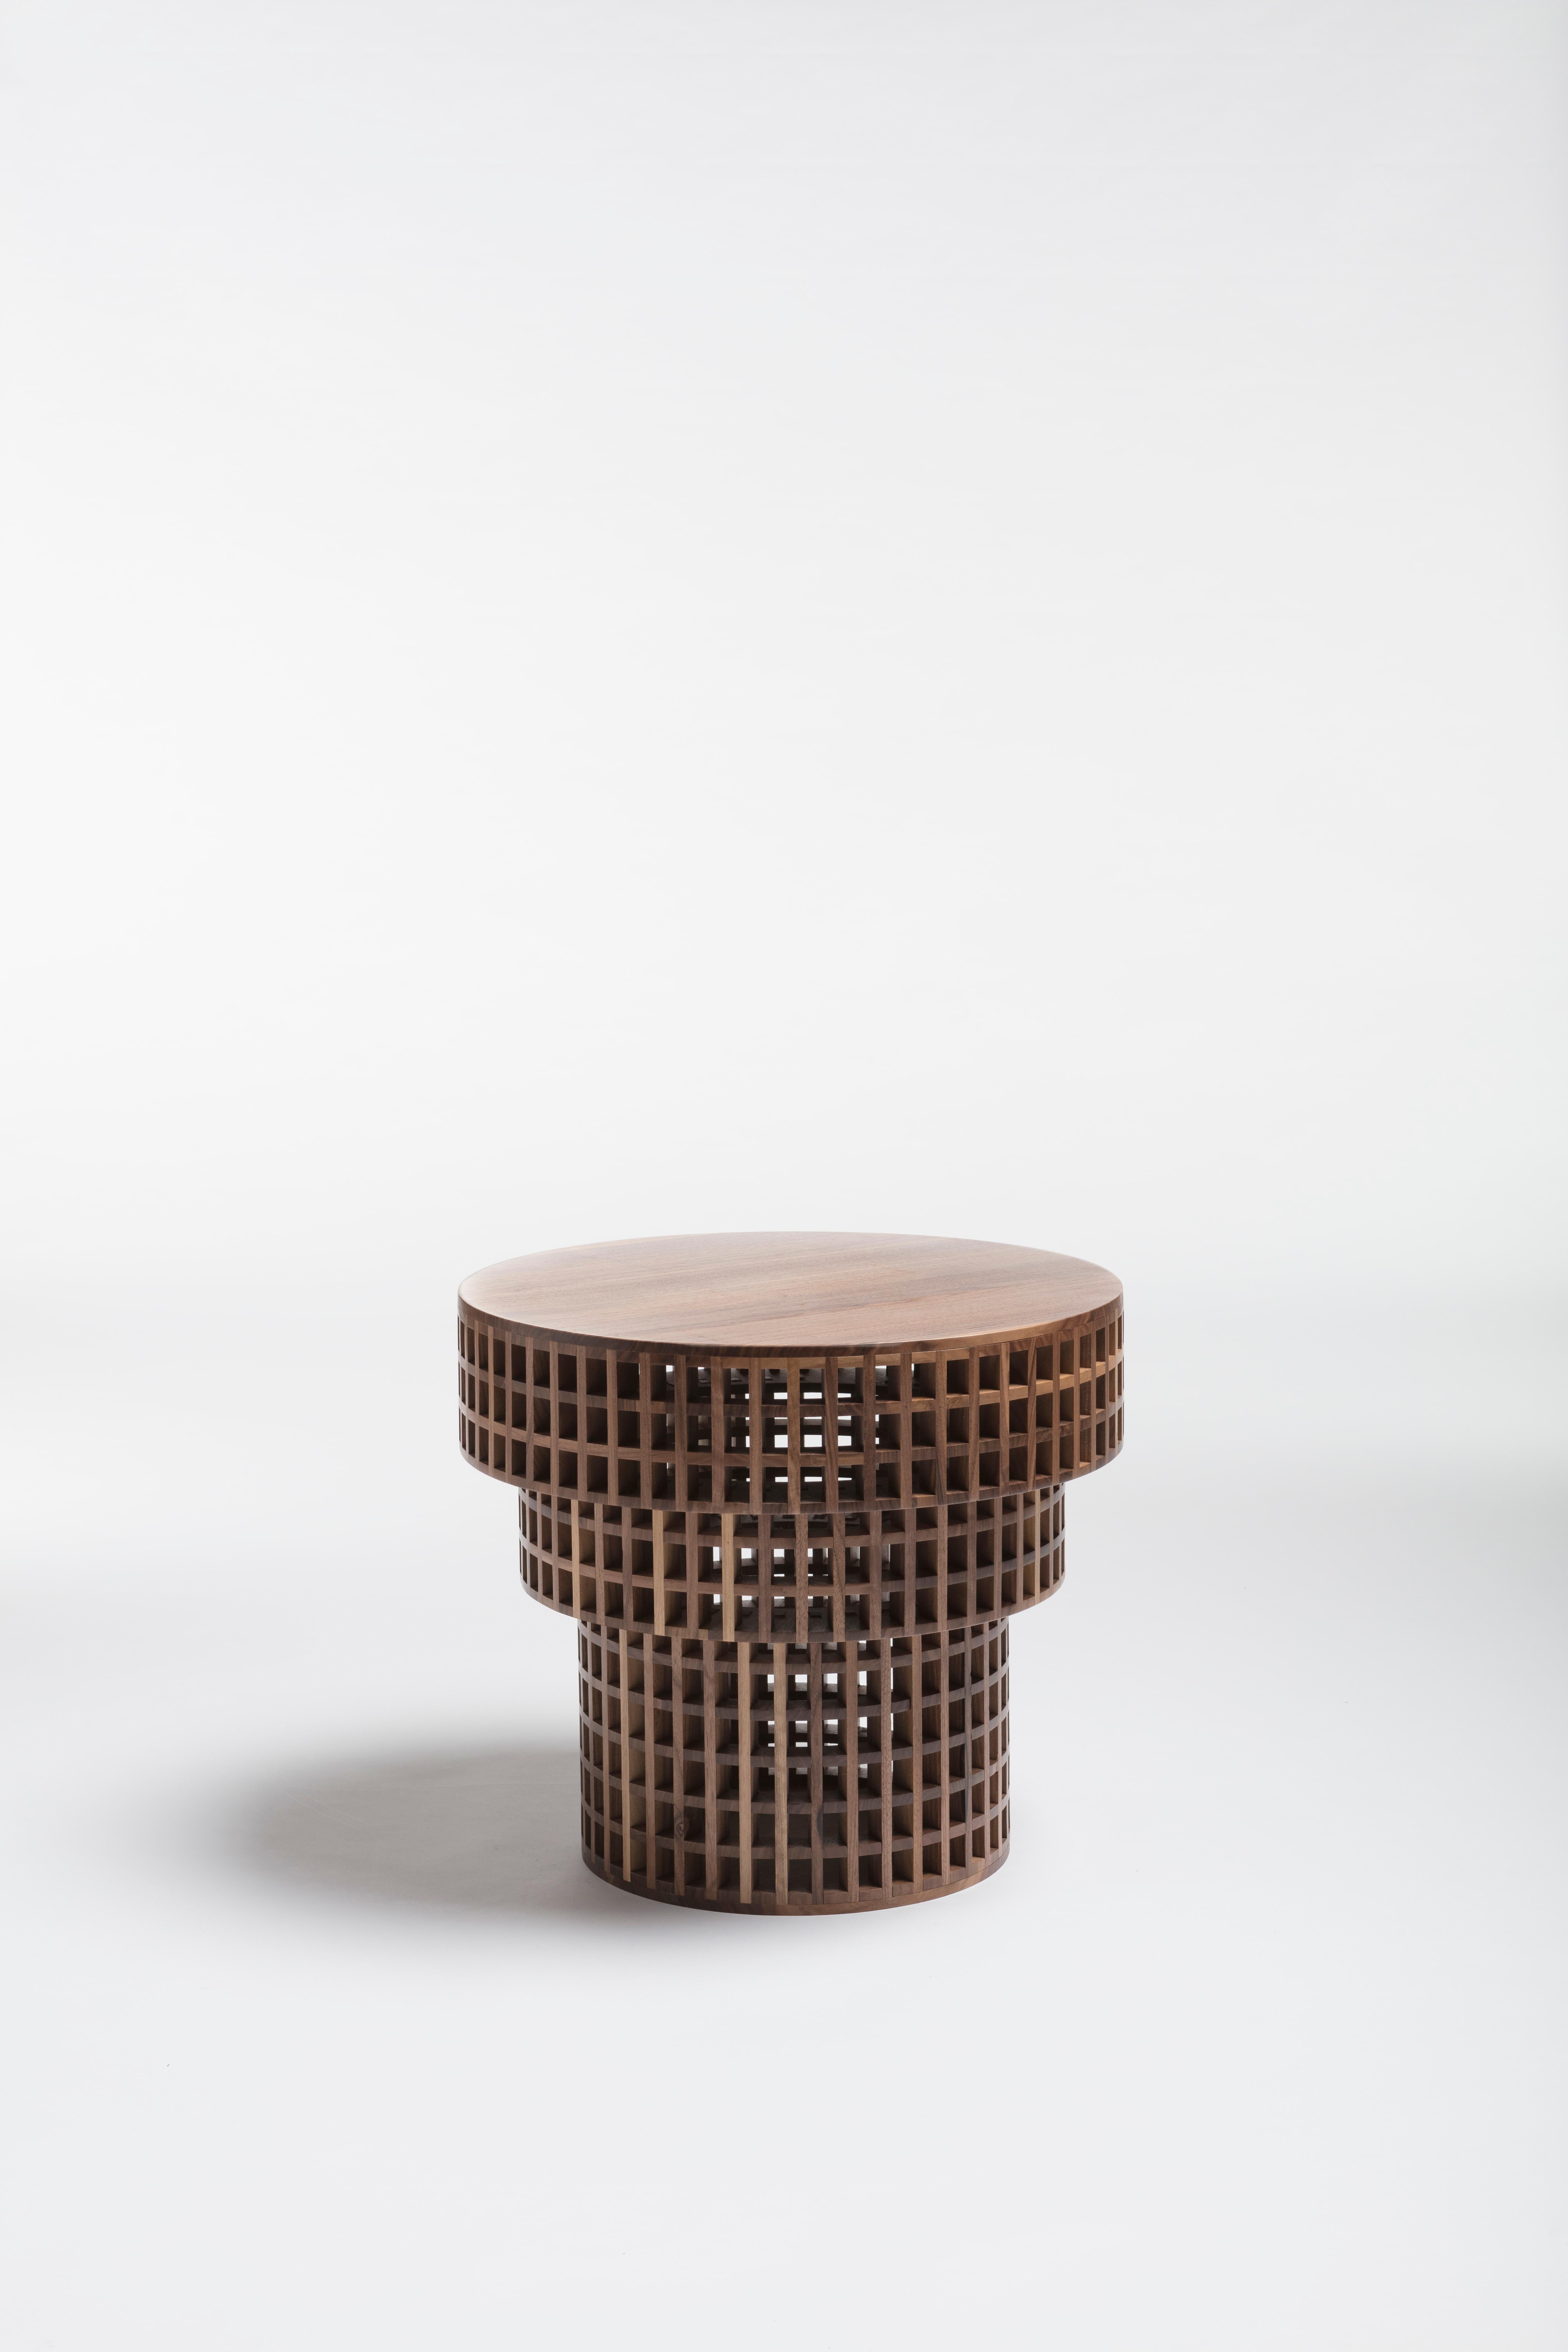 Carabottino tavolino side table by Cara Davide
Carabottino collection
Medulum
Dimensions: Ø 58 x H 51 cm
Materials: Canaletto walnut 

Also available: linden wood, European walnut

A wooden grating in a two-dimensional form traditionally made with